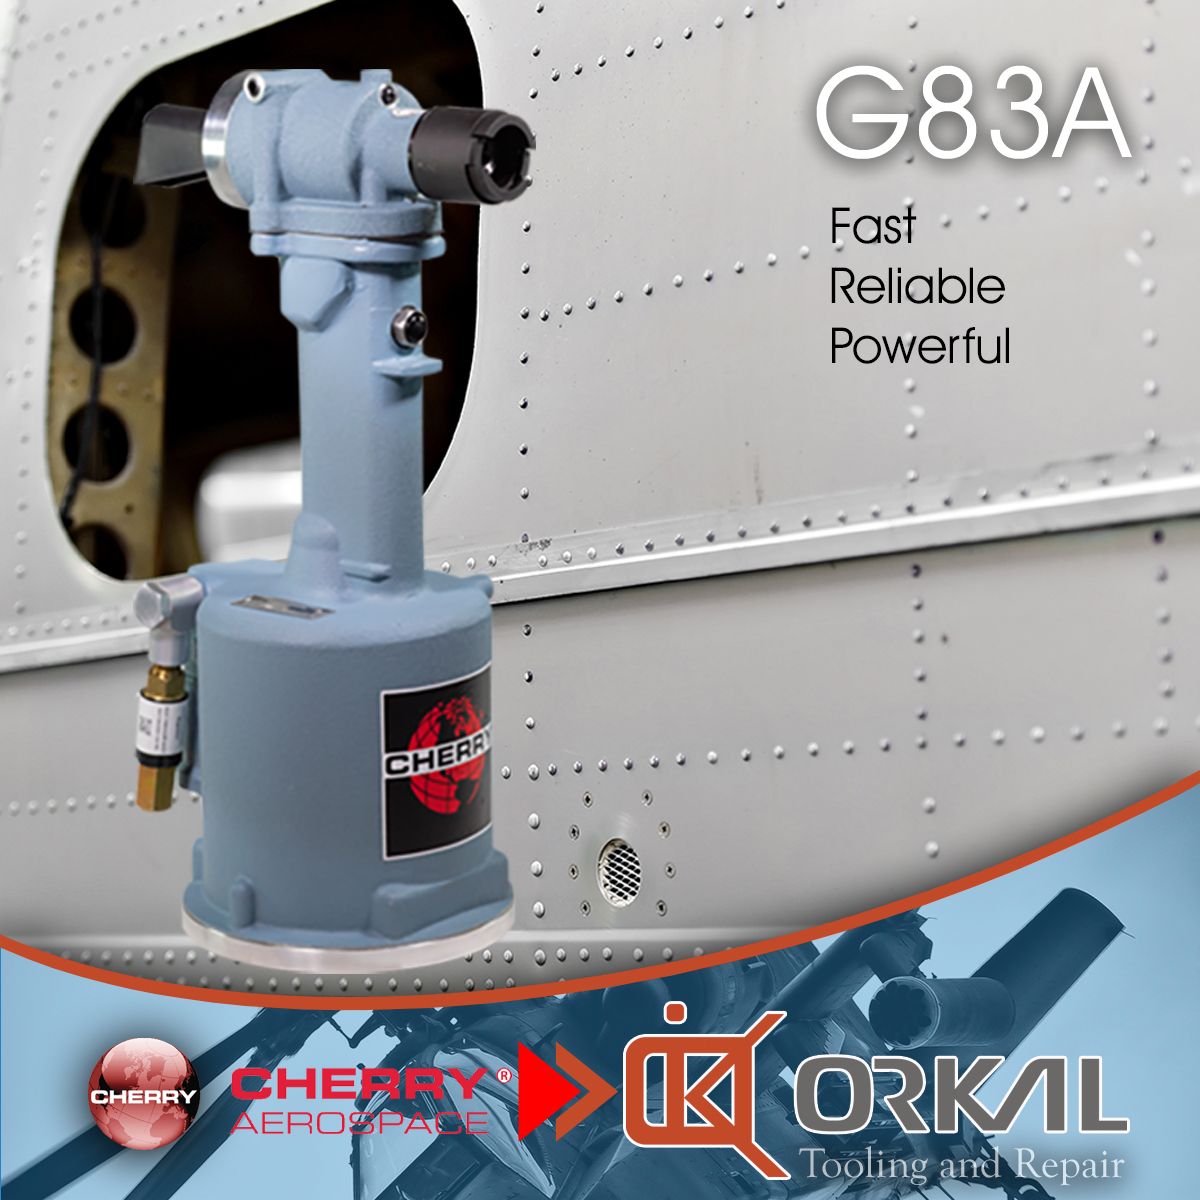 an industrial rivet gun labeled "g83a" by cherry aerospace, mounted near an airplane fuselage with auto draft, and described as fast, reliable, and powerful.